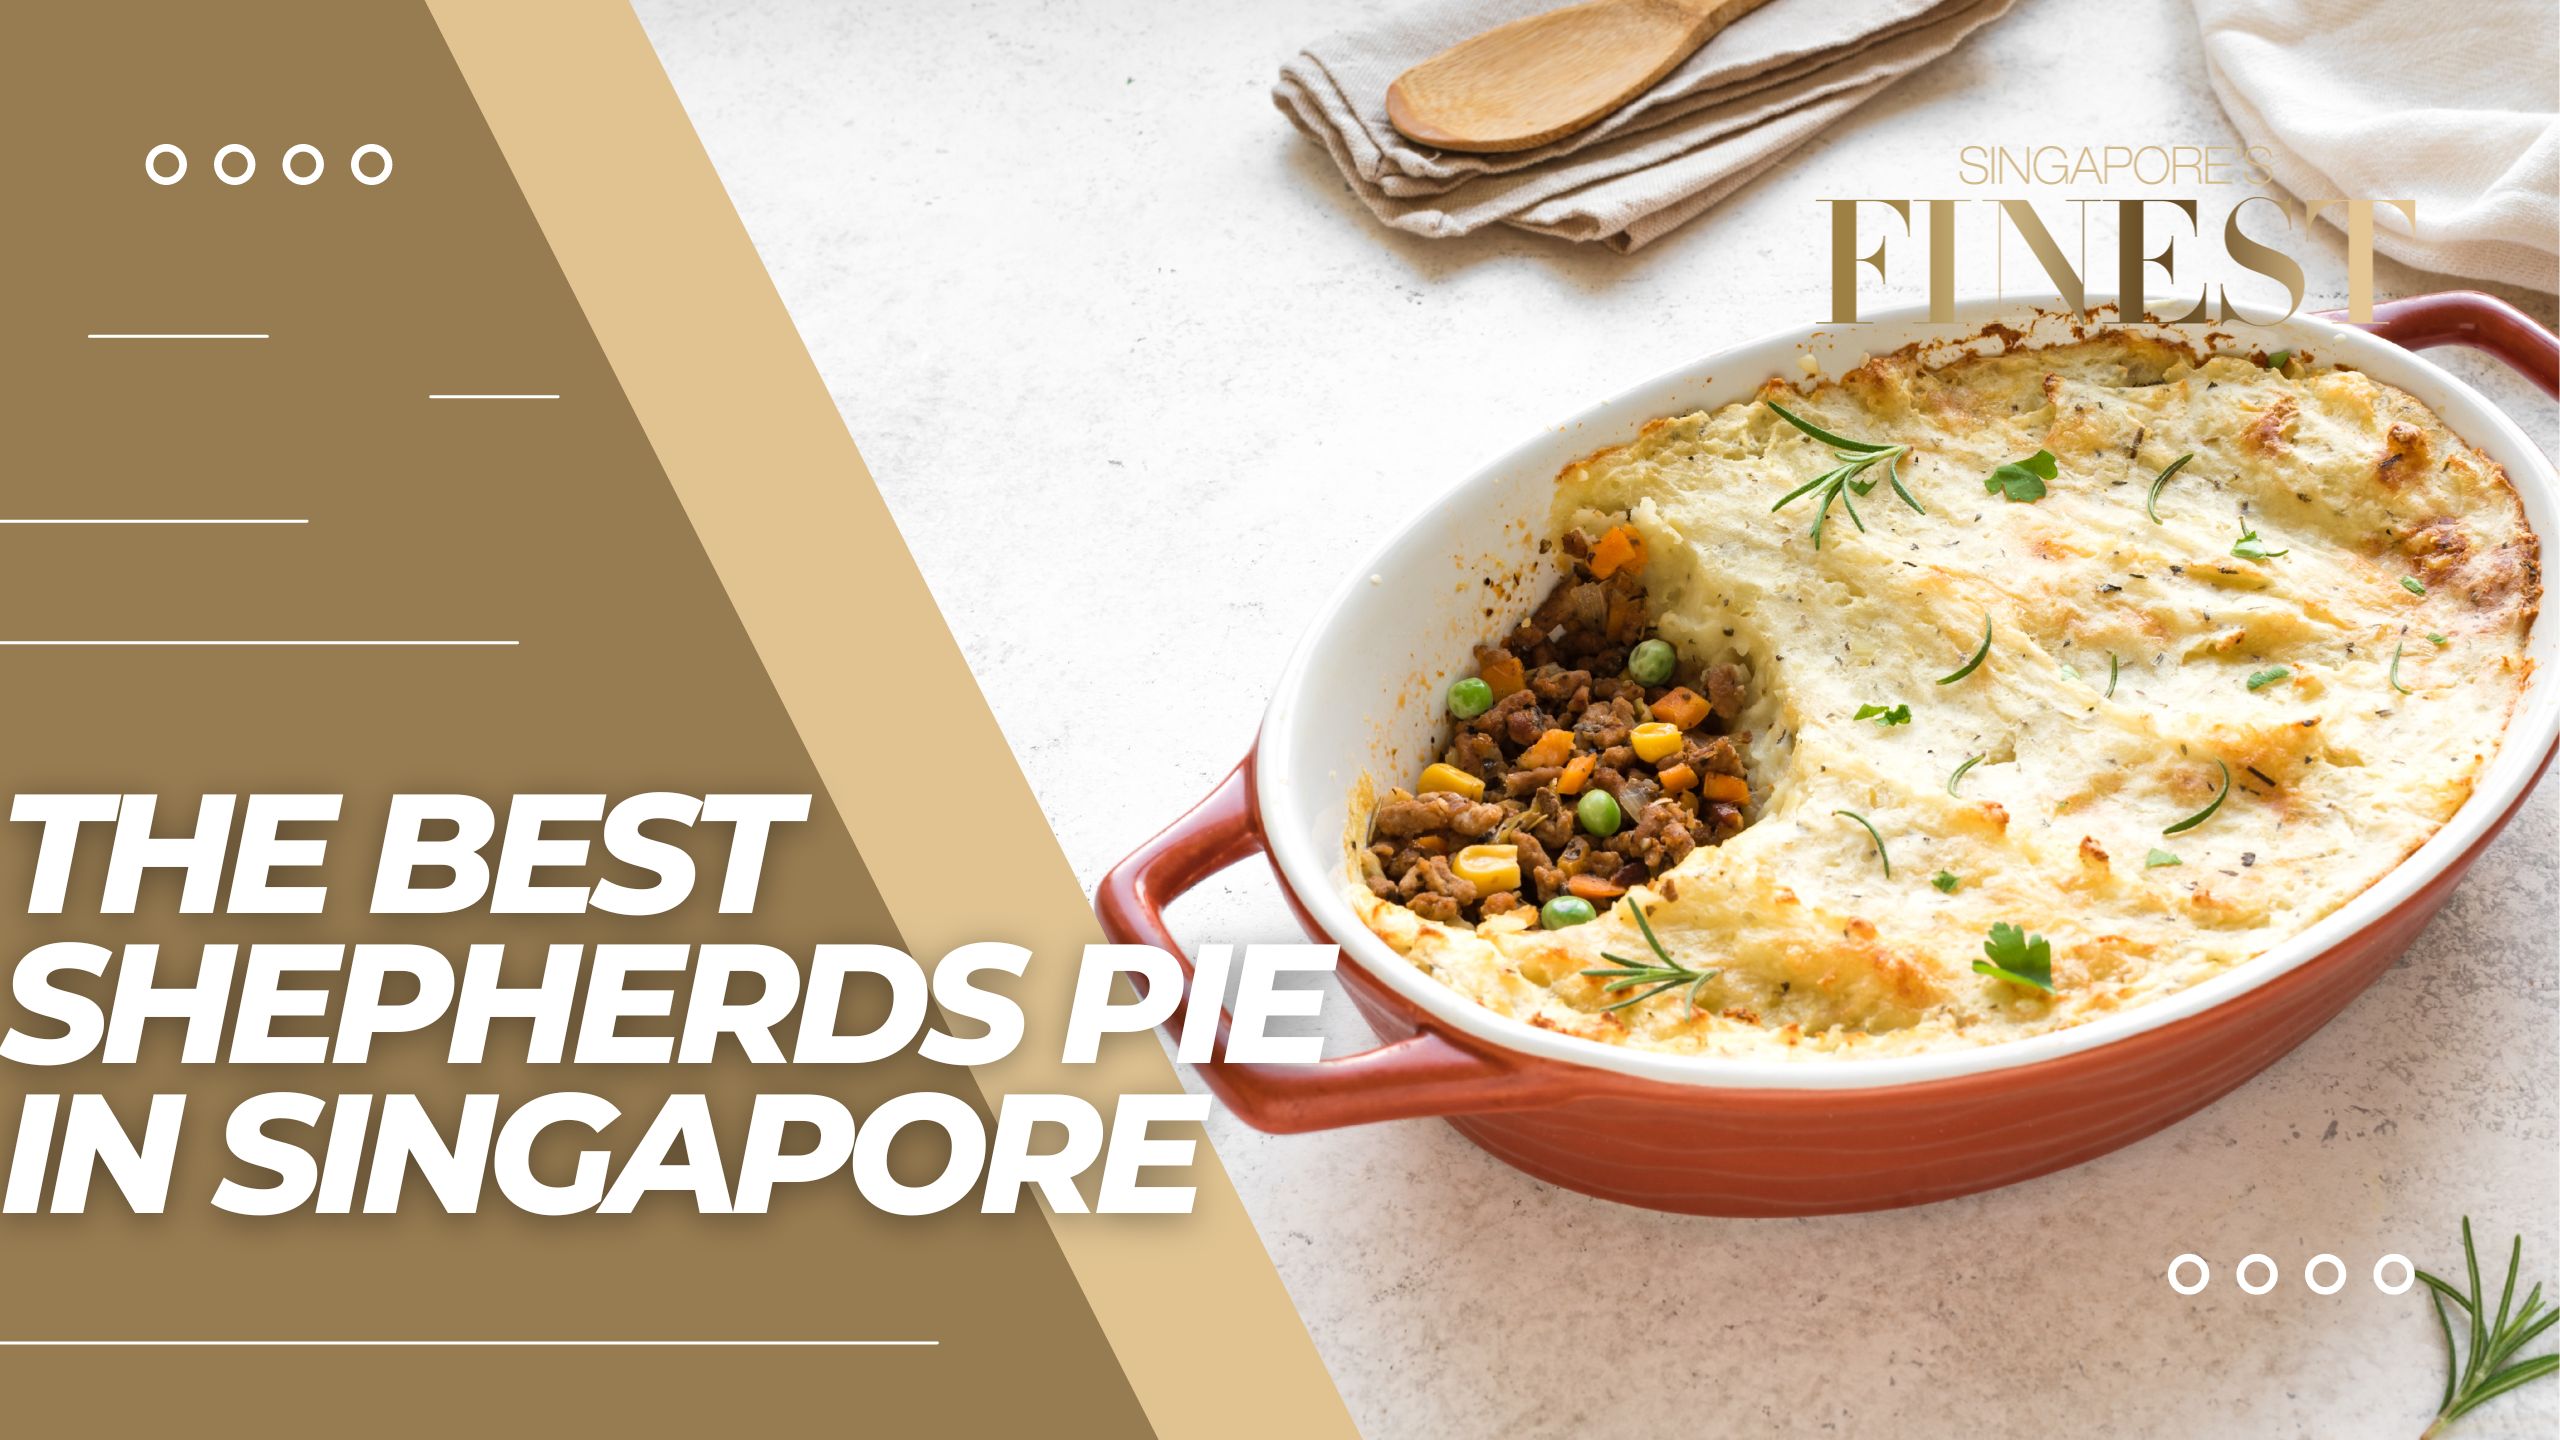 The Finest Shepherds Pie in Singapore